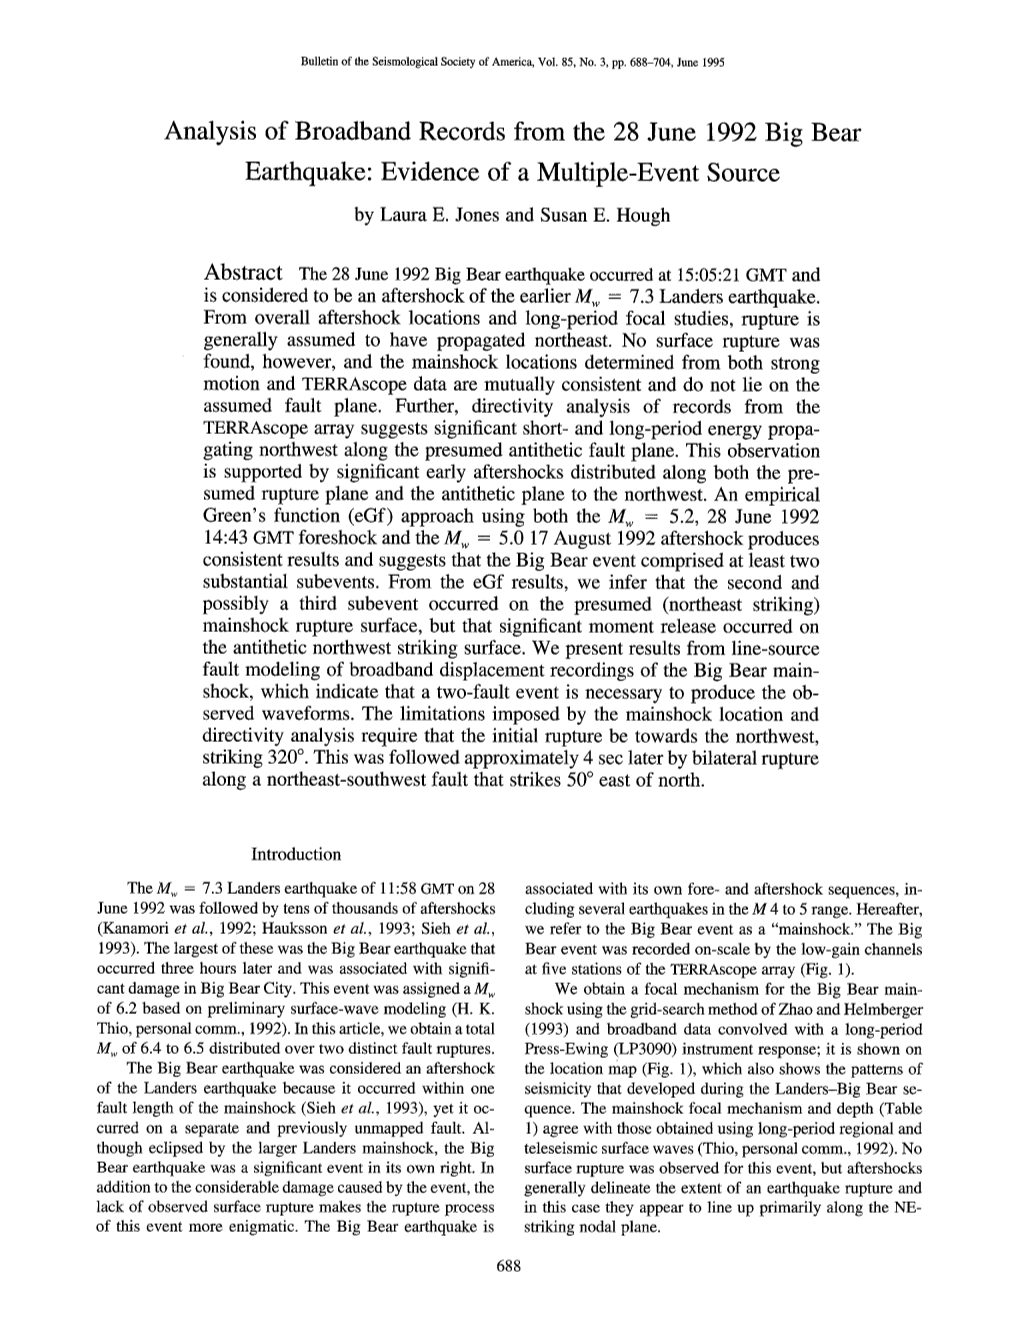 Analysis of Broadband Records from the 28 June 1992 Big Bear Earthquake: Evidence of a Multiple-Event Source